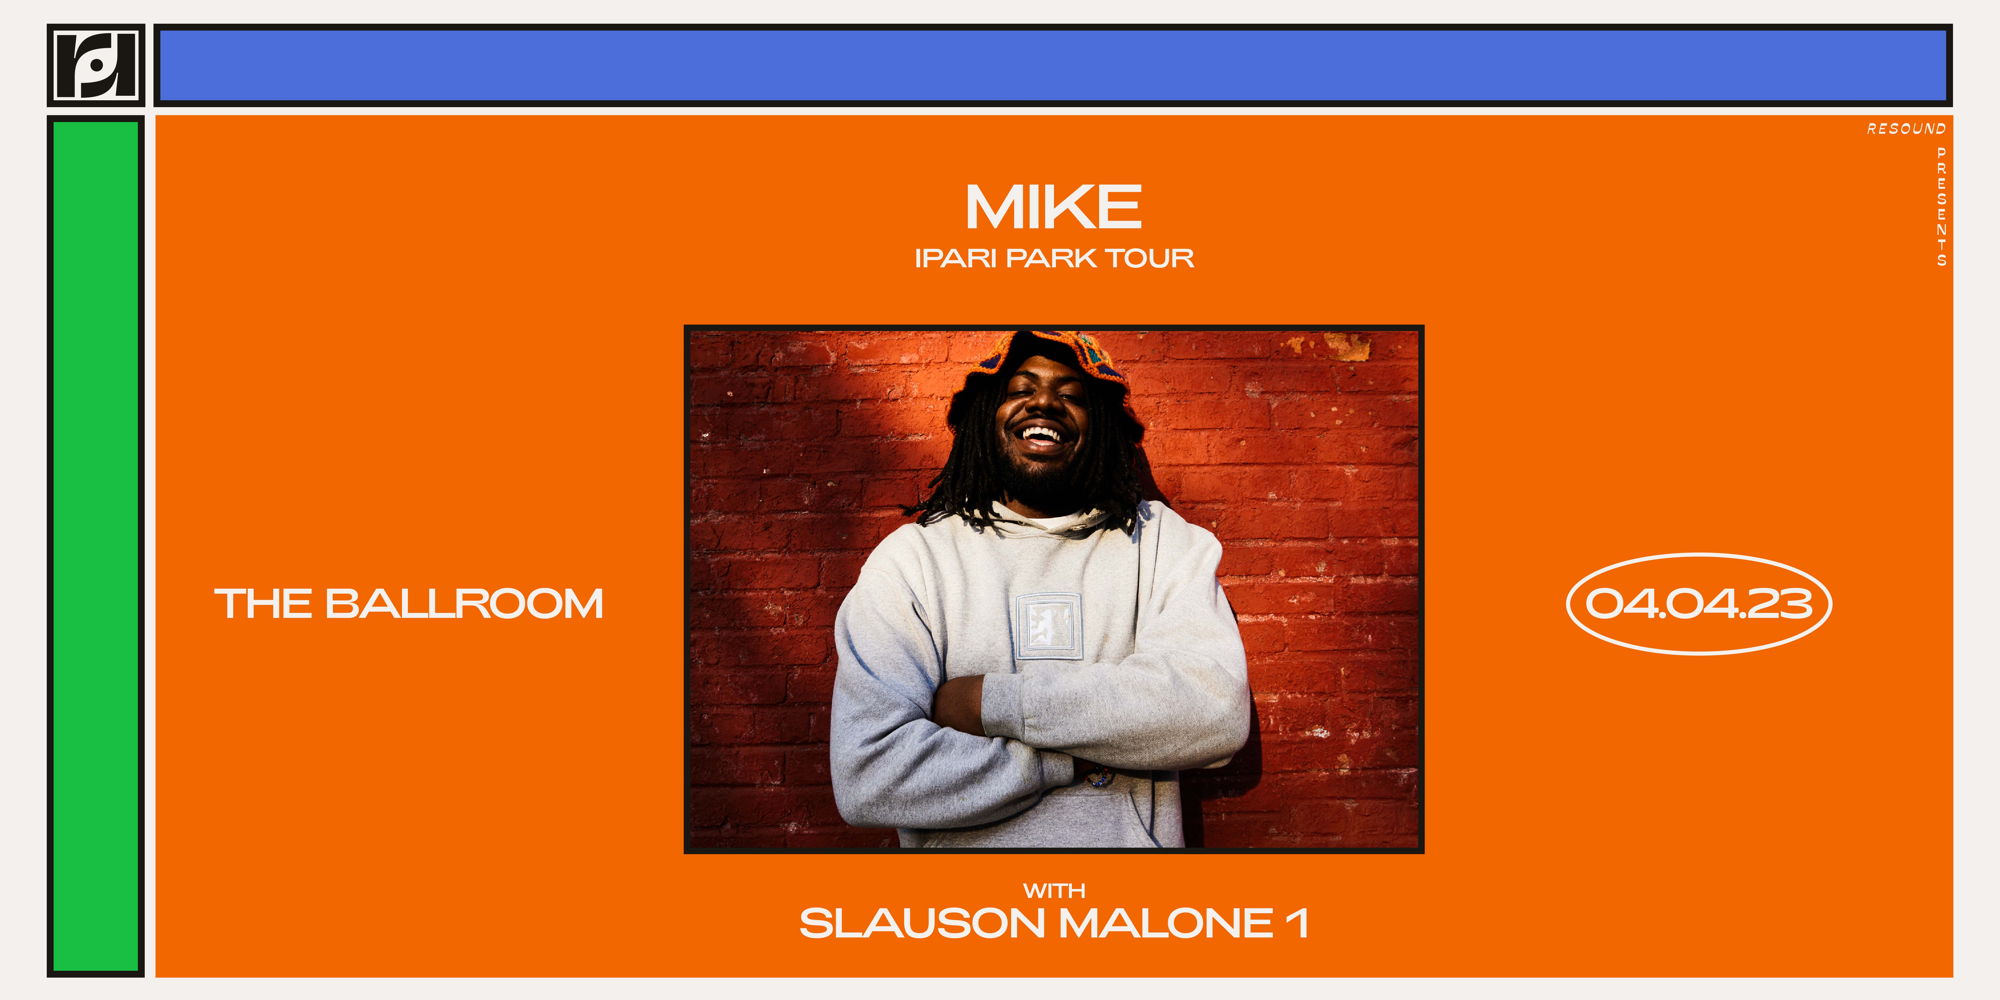 Resound Presents: MIKE - Ipari Park Tour w/ Slauson Malone 1 at The Ballroom on 4/4/23 promotional image